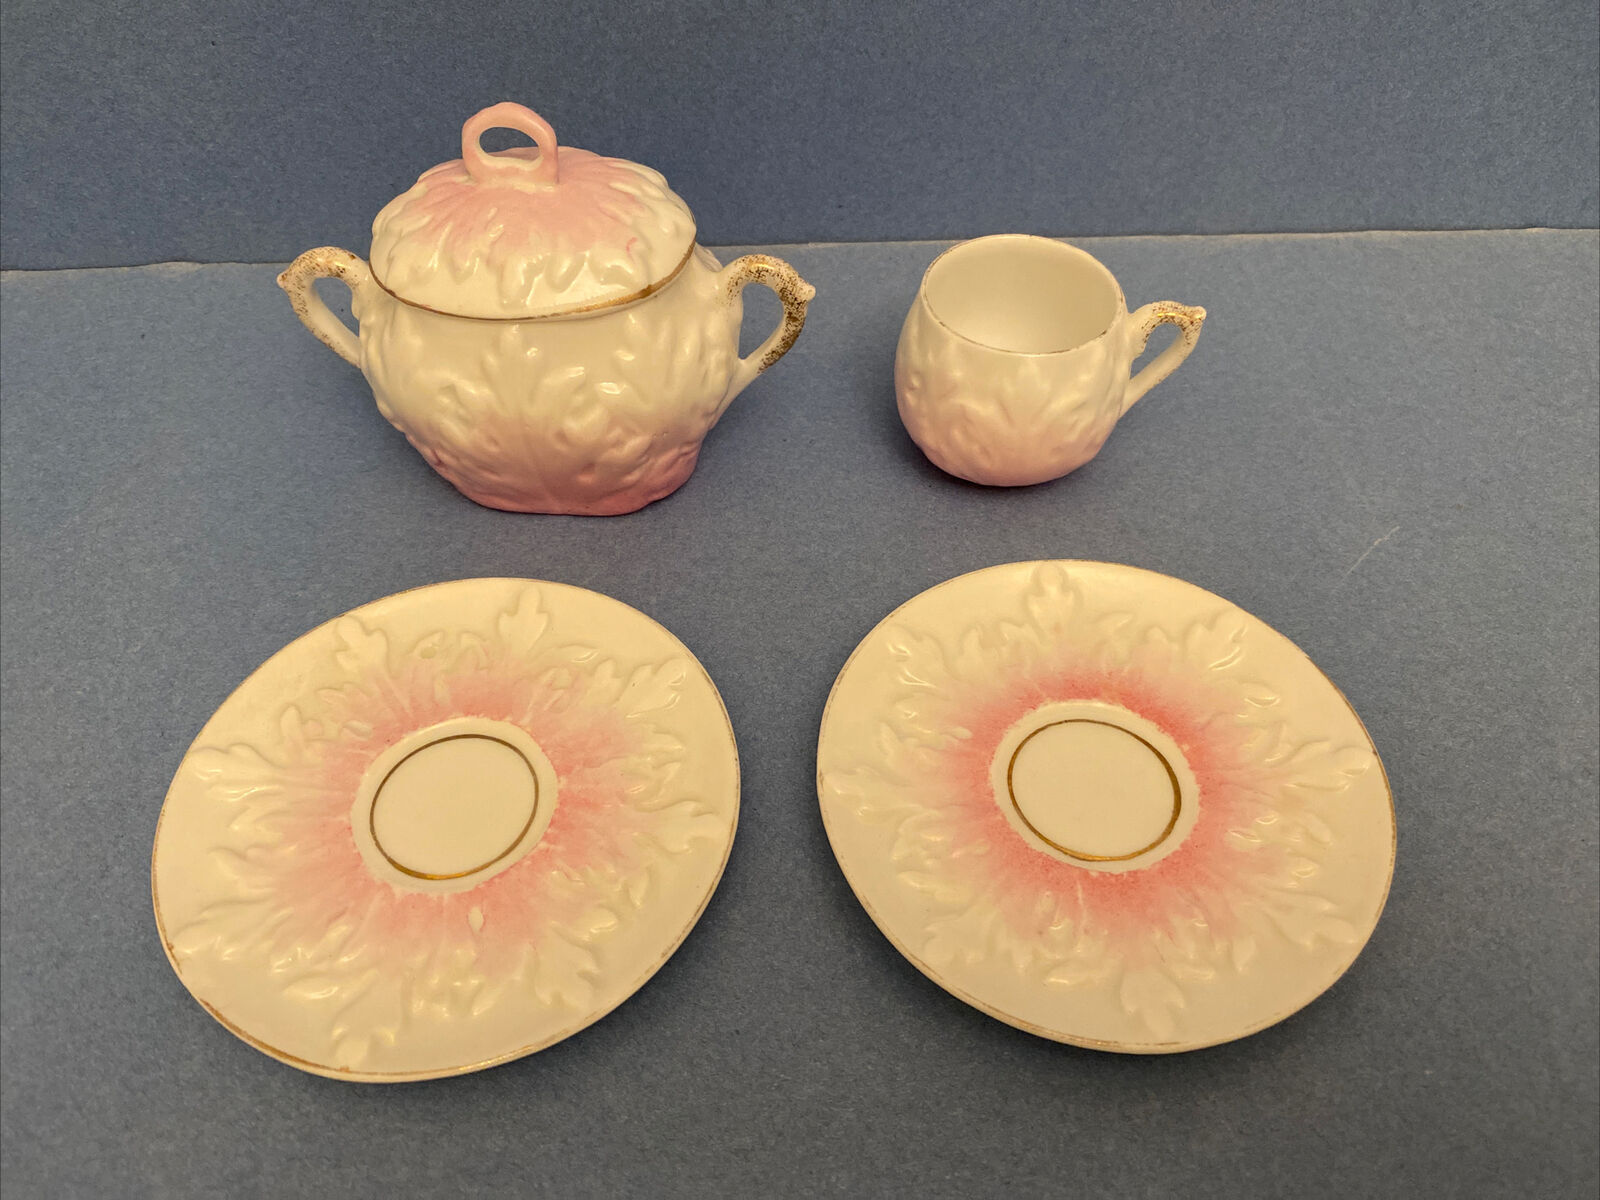 Vintage Porcelain White & Pink Tea Cup, Saucers and Covered Sugar Bowl, Embossed